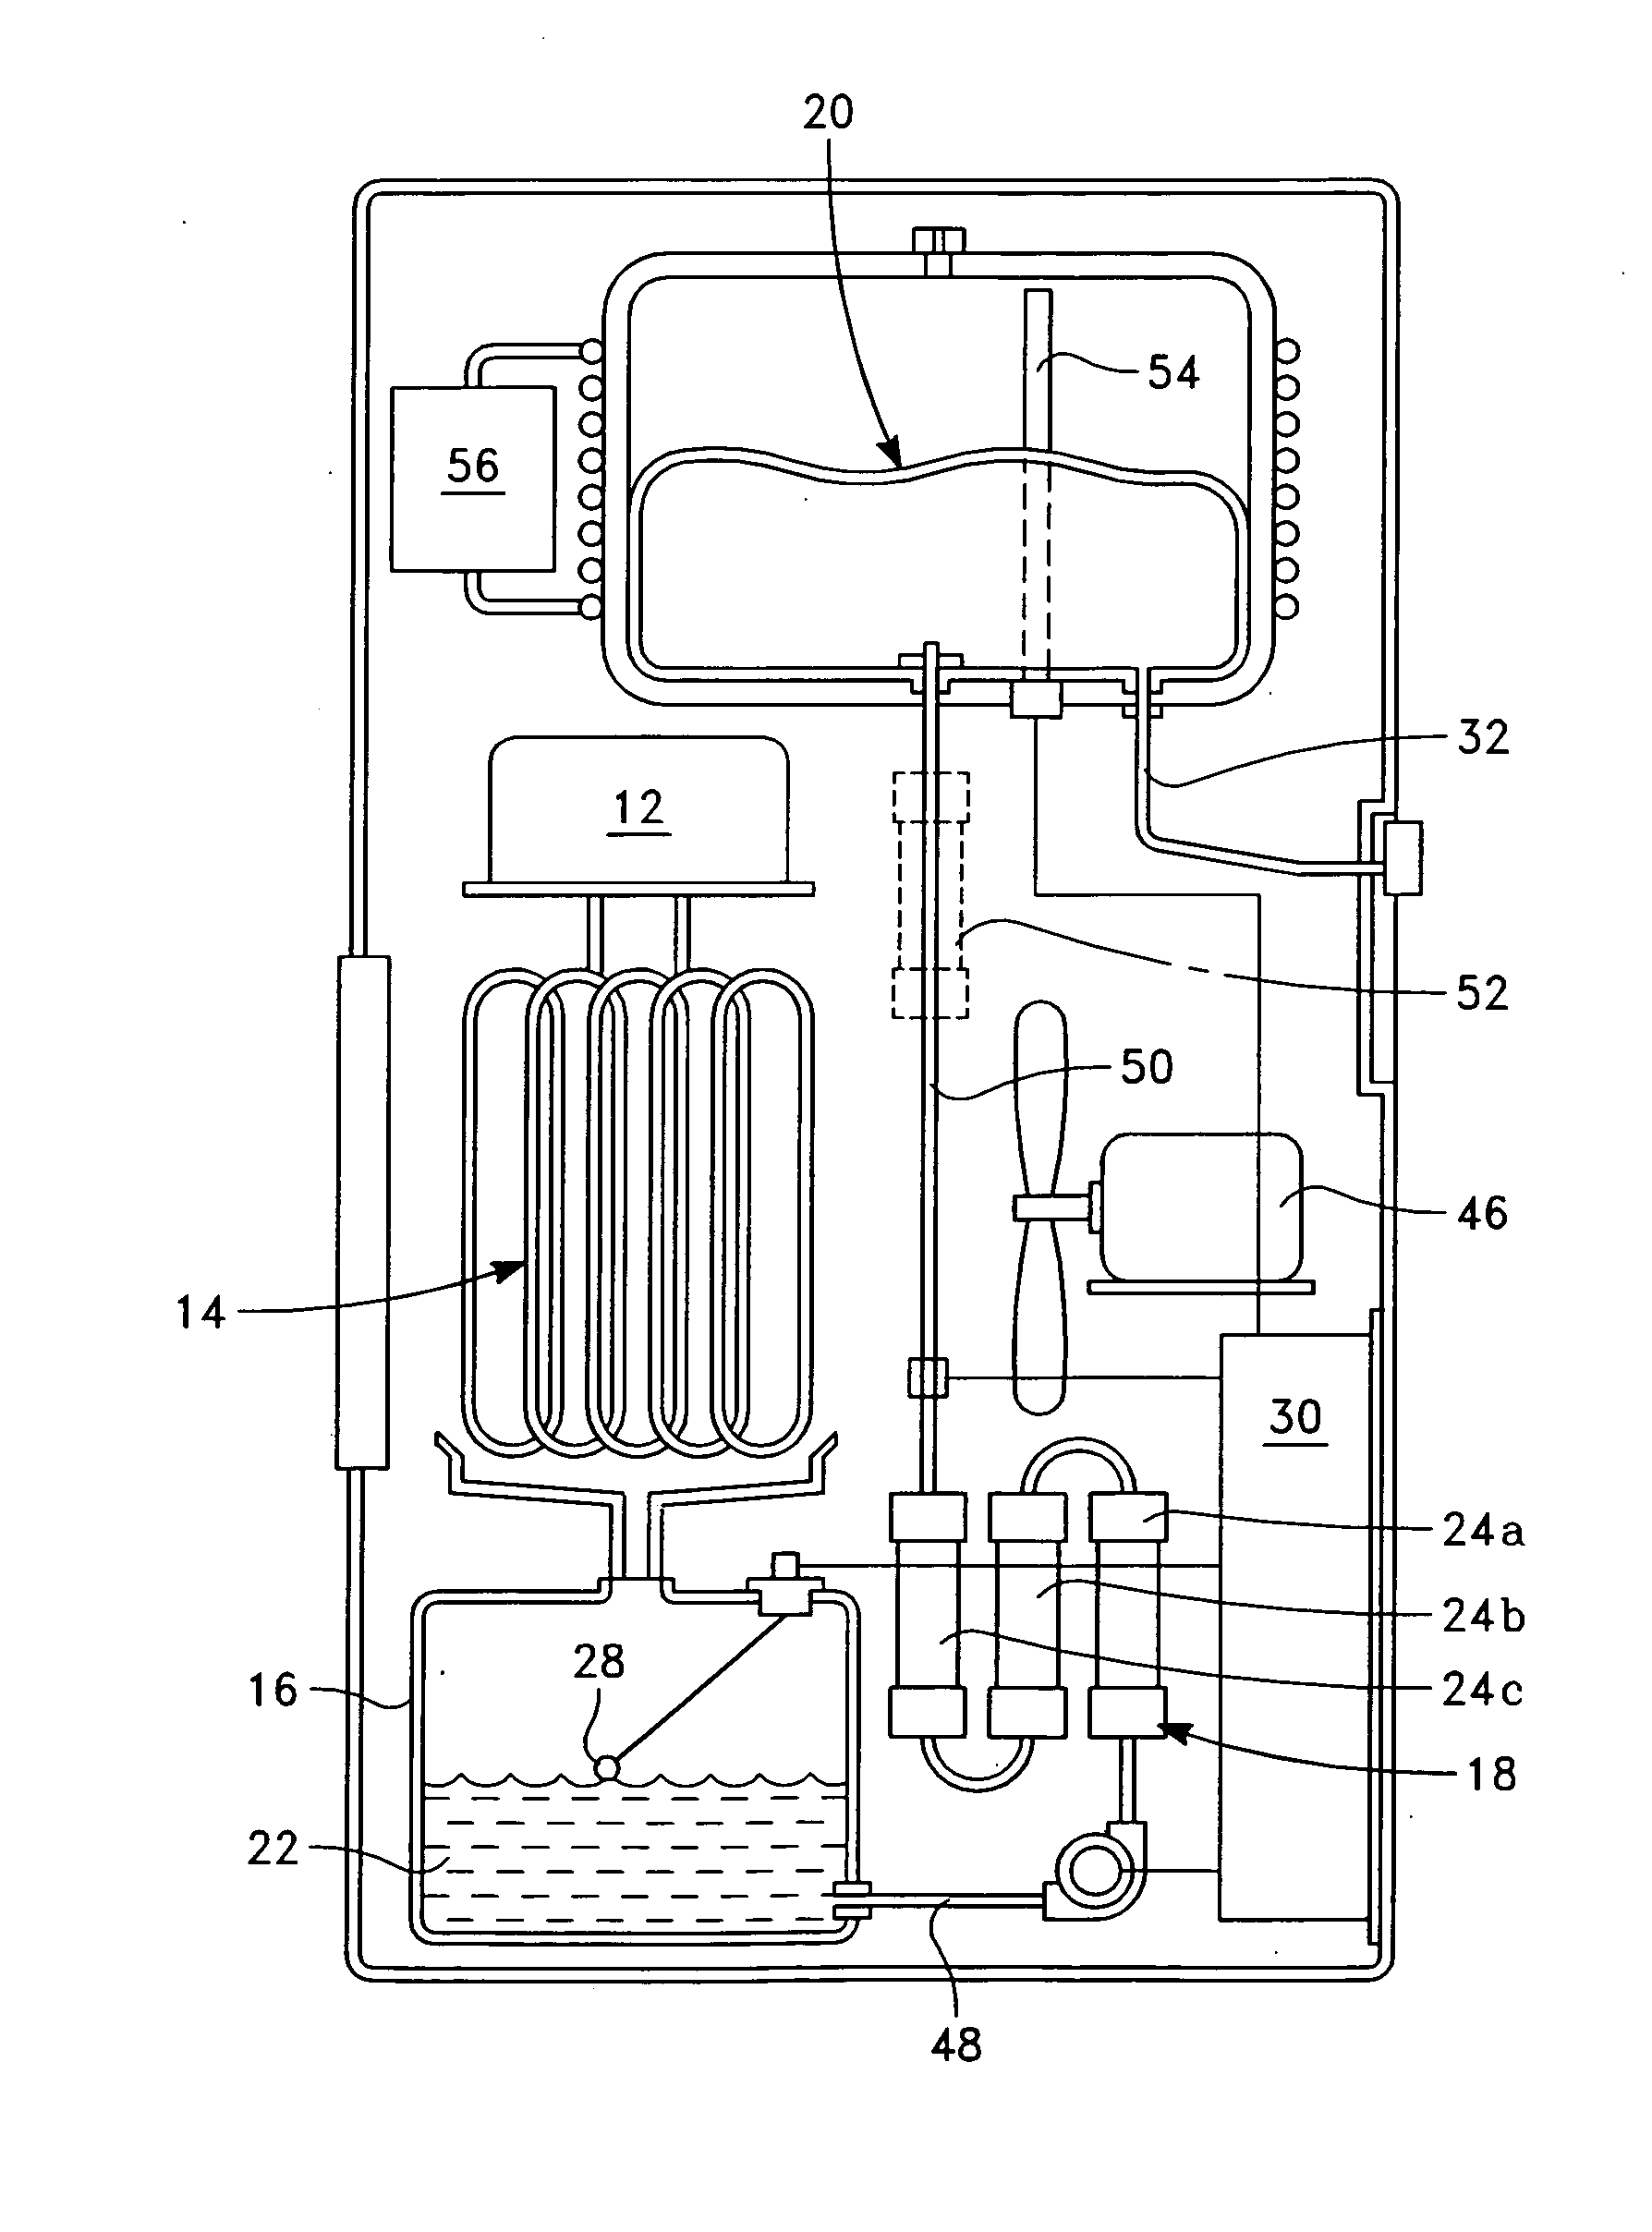 Method and apparatus for dehumidifying atmospheric moisture and purifying same